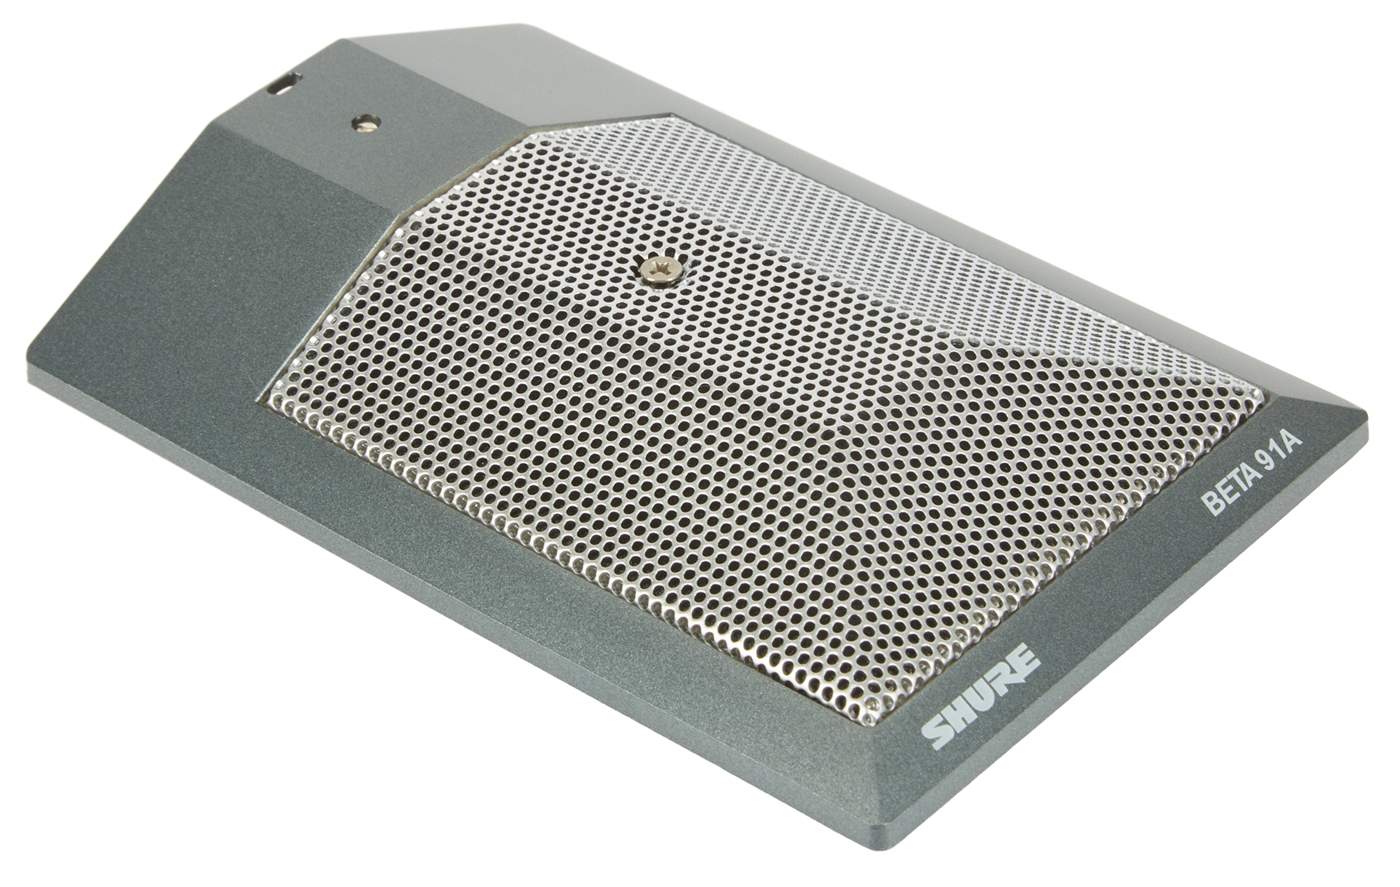 SHURE BETA91 A Condenser Microphone | Kytary.ie